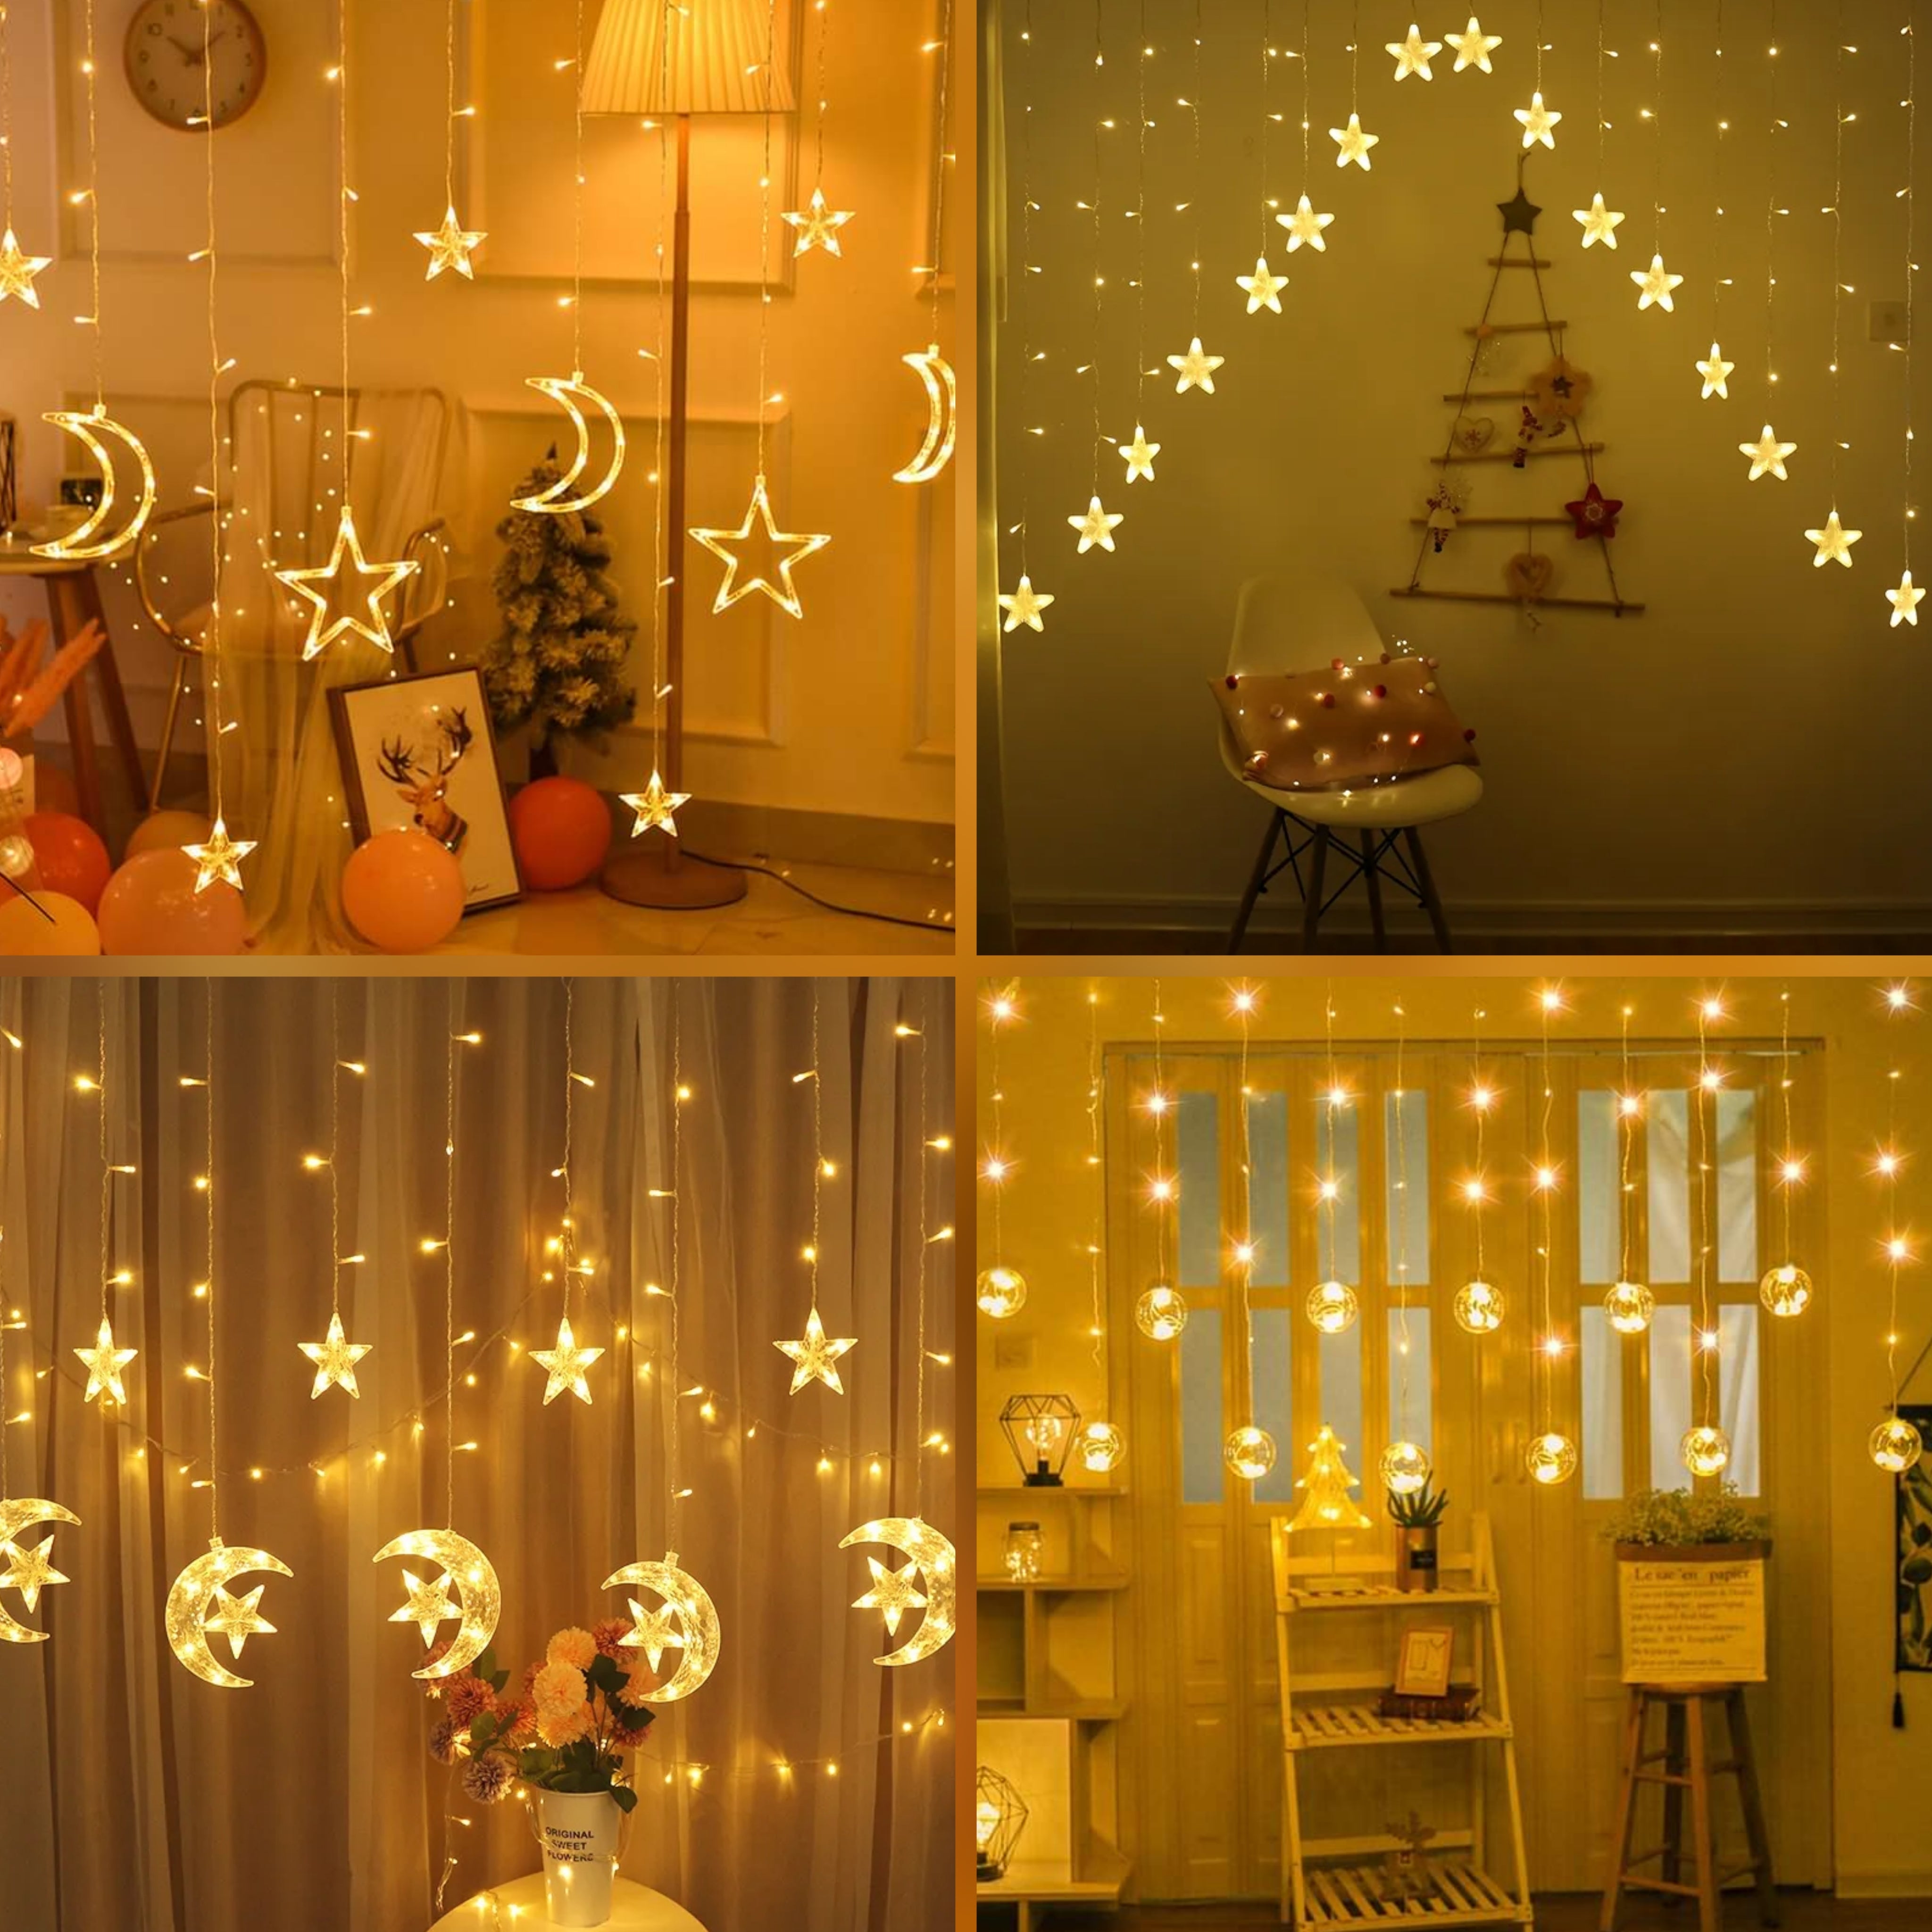 Curtain lights in different designs and style